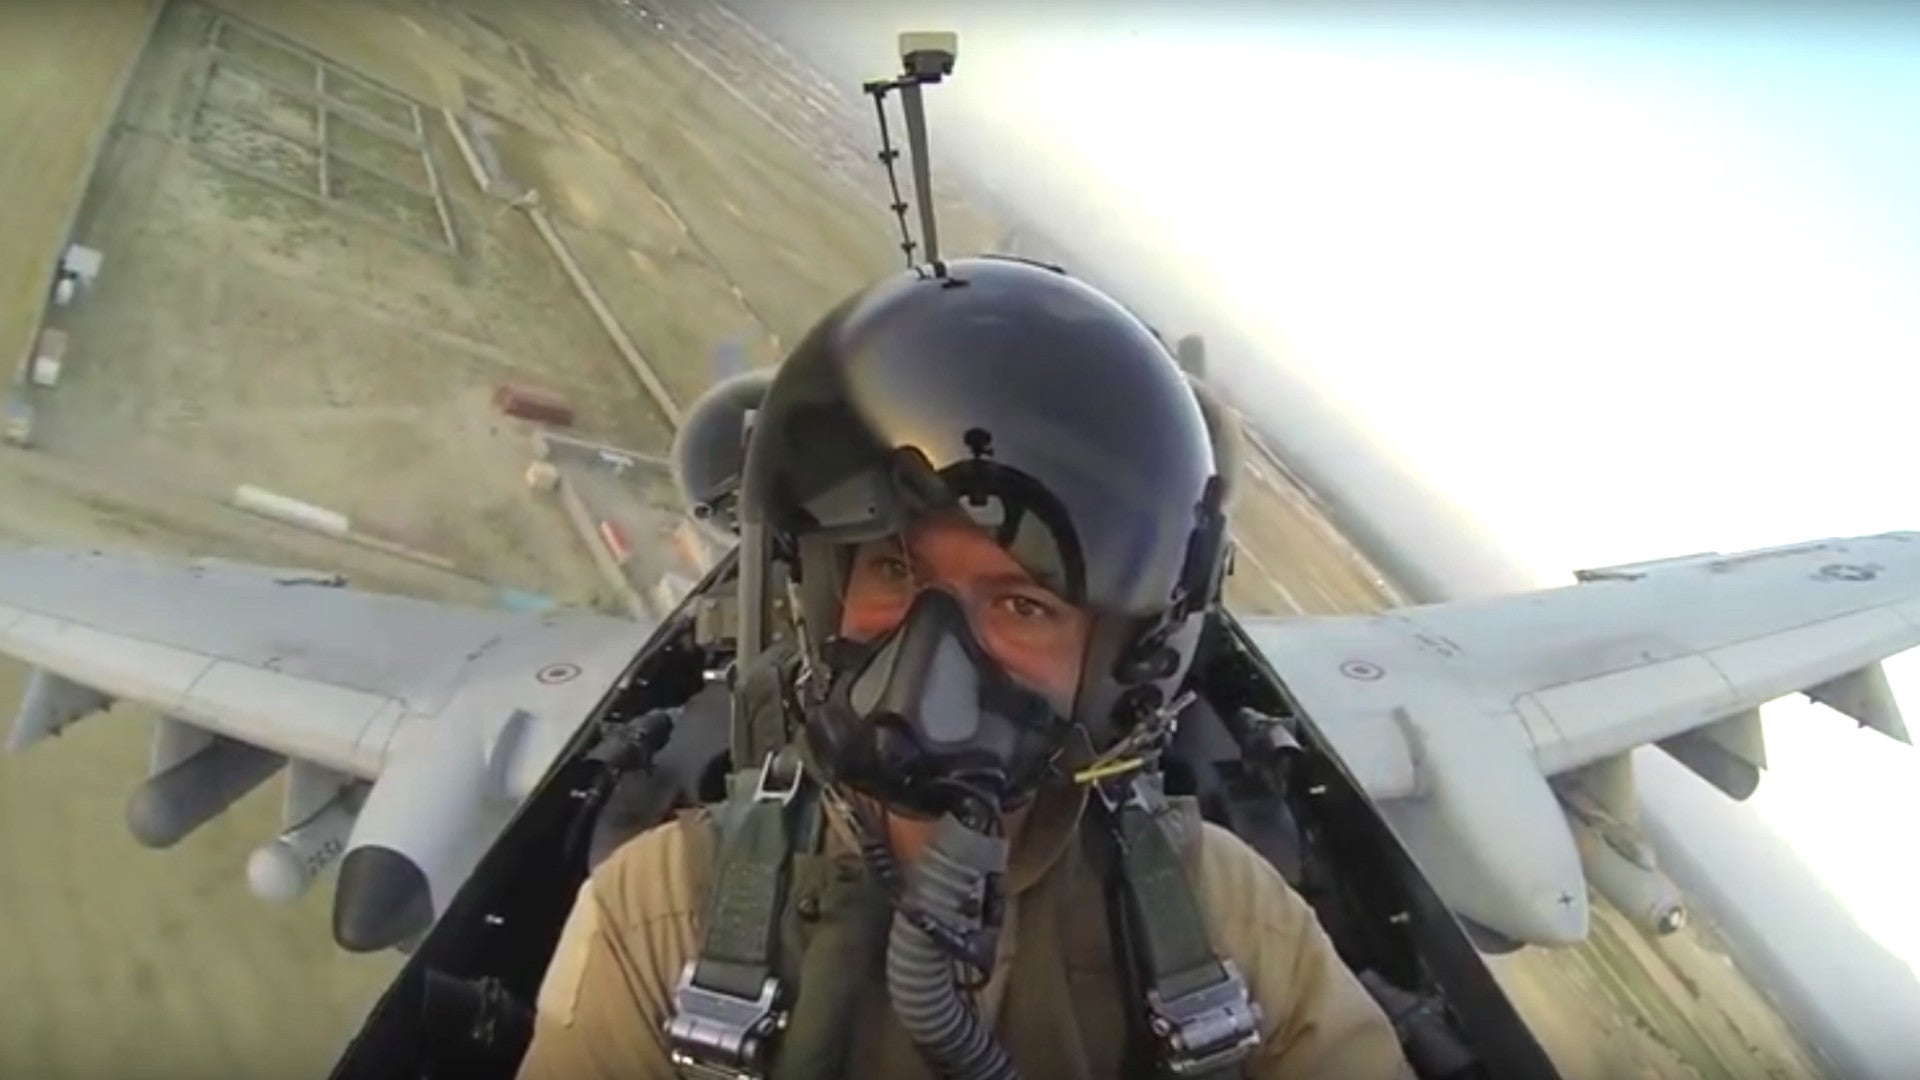 Watch The “Final Cut” Of A Glowing Film About The A-10 That The USAF Tried to Suppress